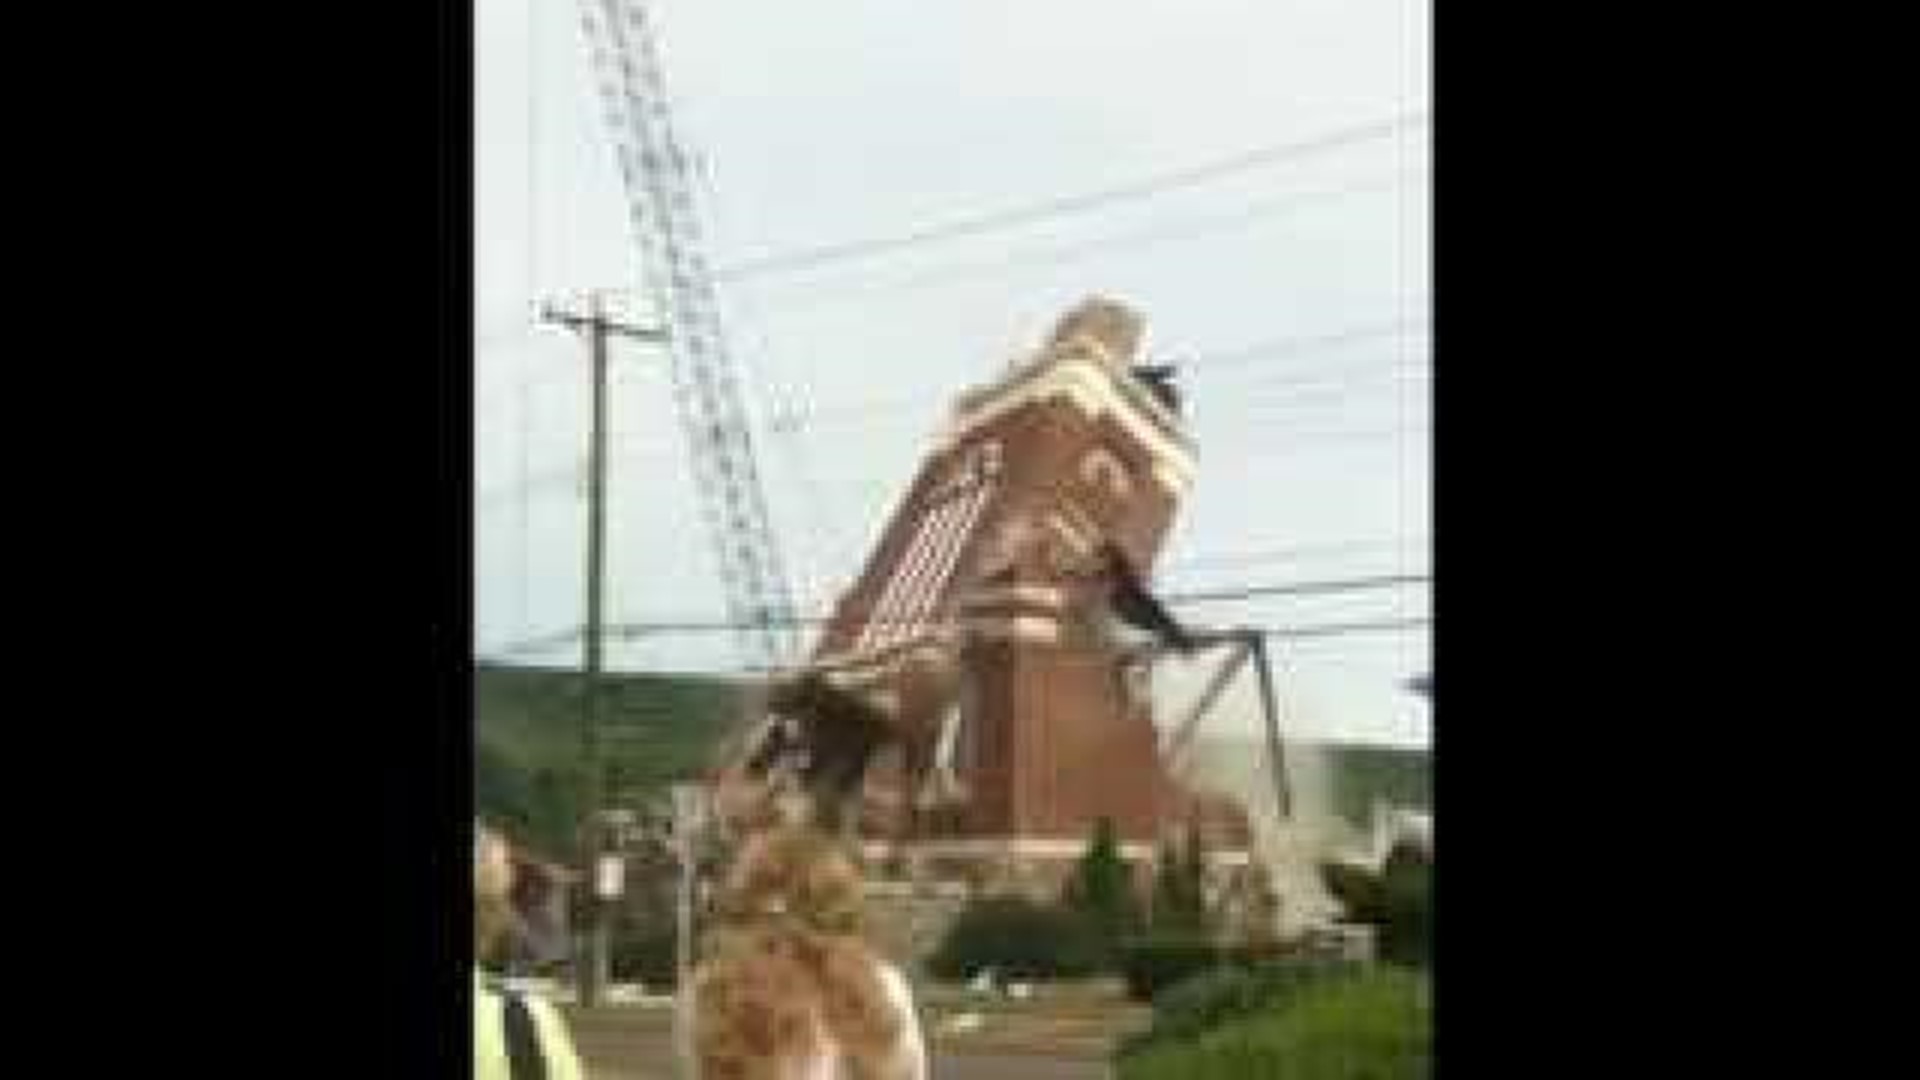 Church Collapse - Cell Phone Video